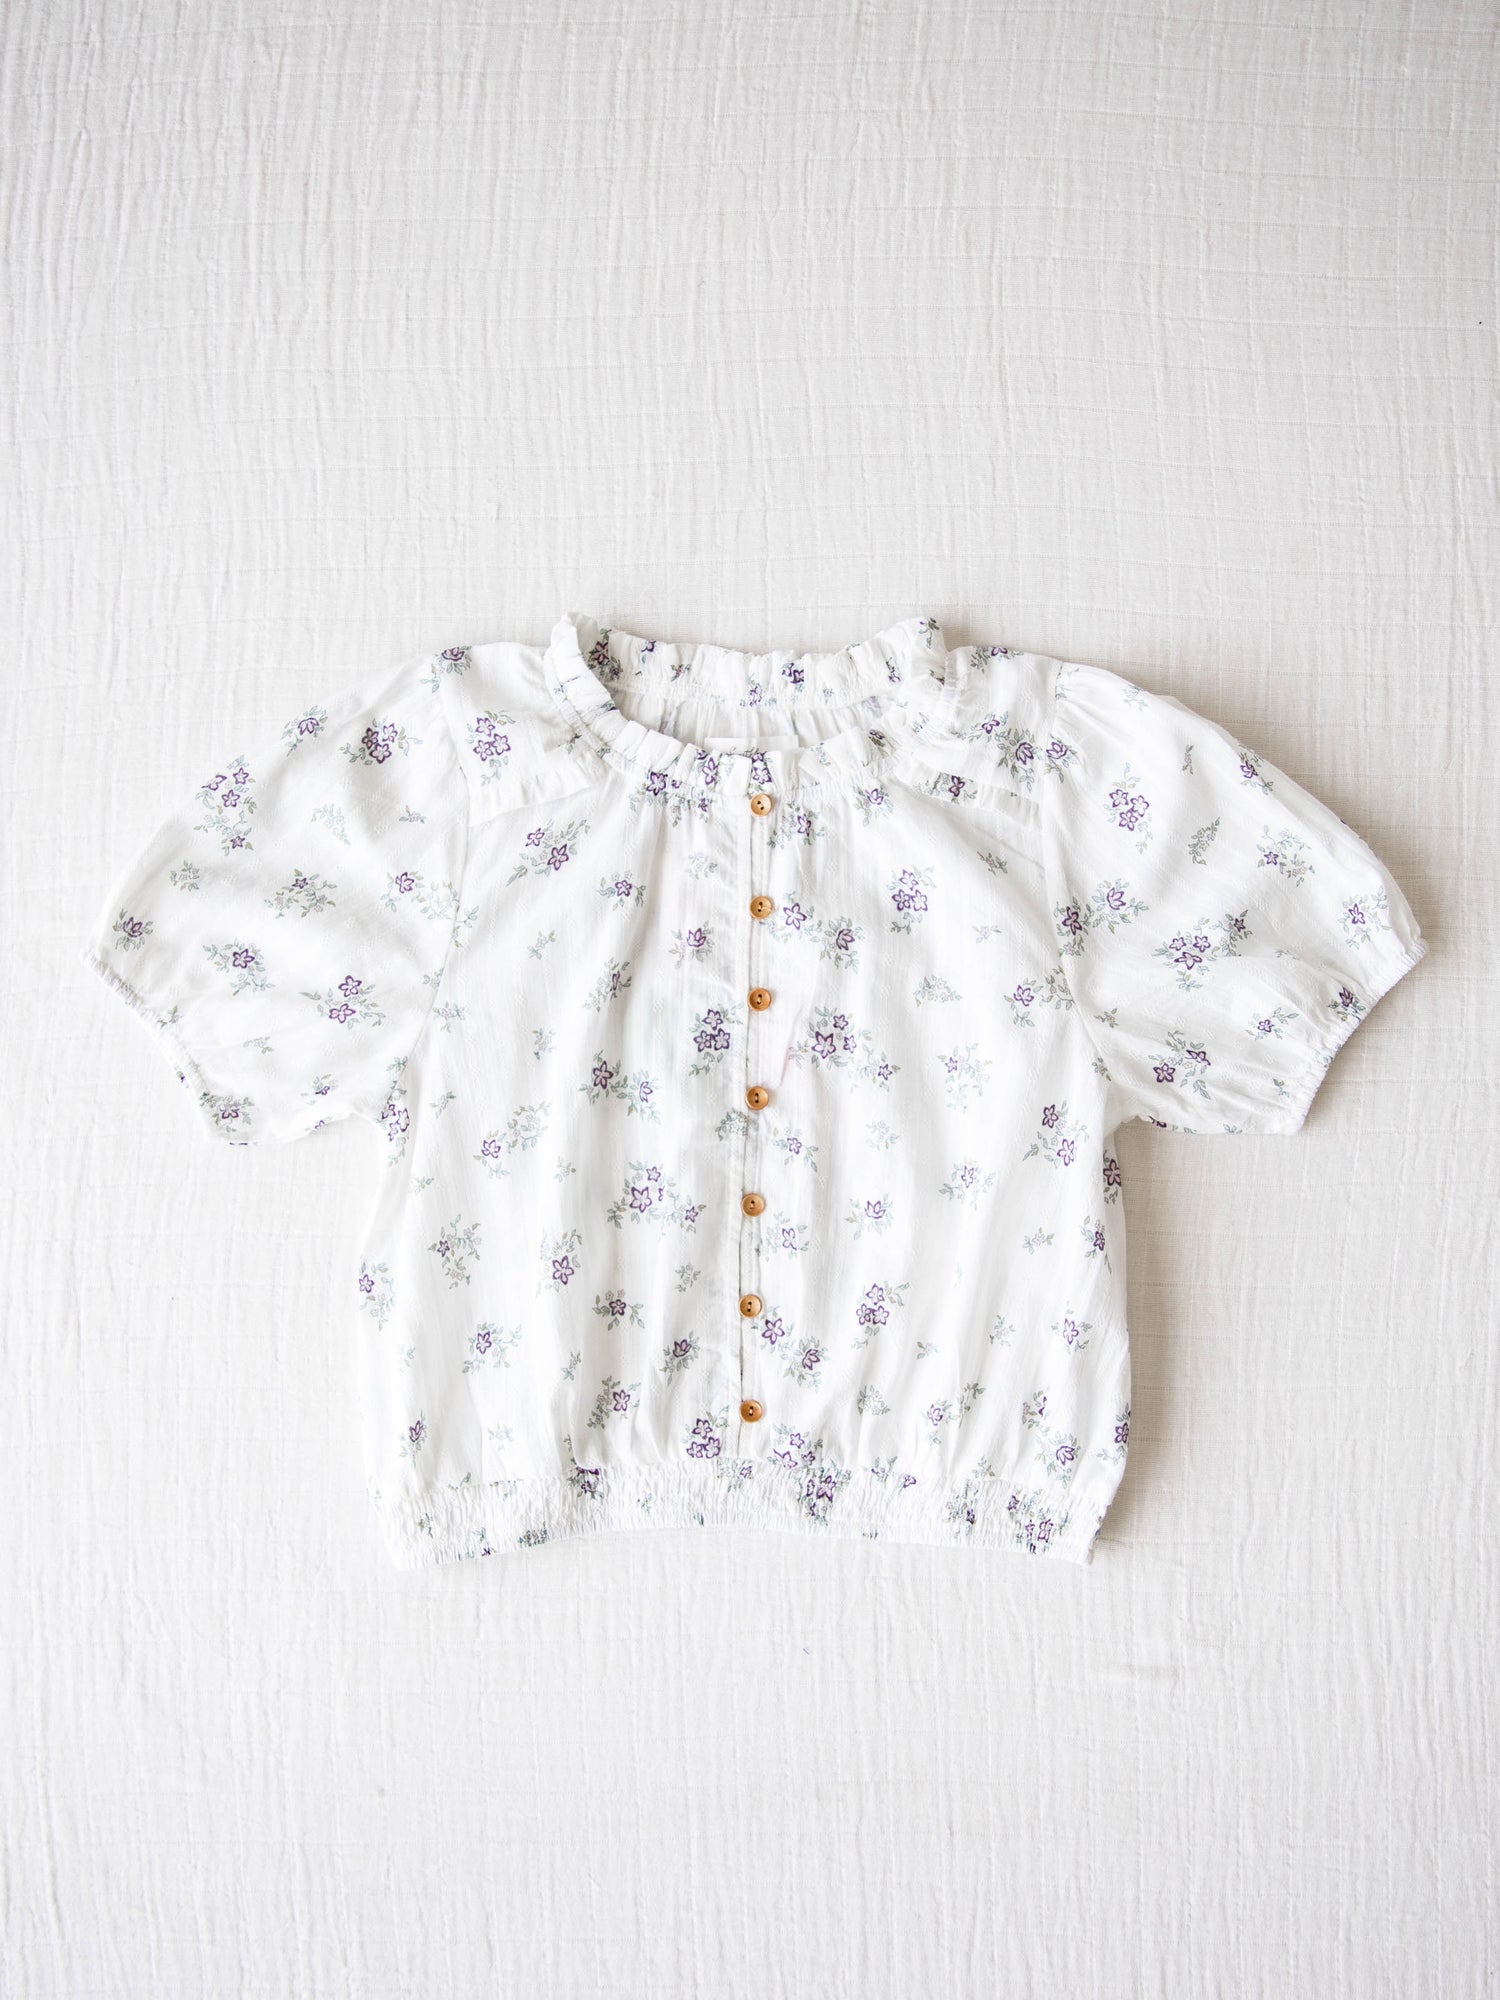 Classic Button Top - Lavender Floral. This top has functional buttons down the bodice, puff sleeves, and elastic ruffle neckline. It is a pattern of lavender and purple colored blooms with leaves on an ivory background.